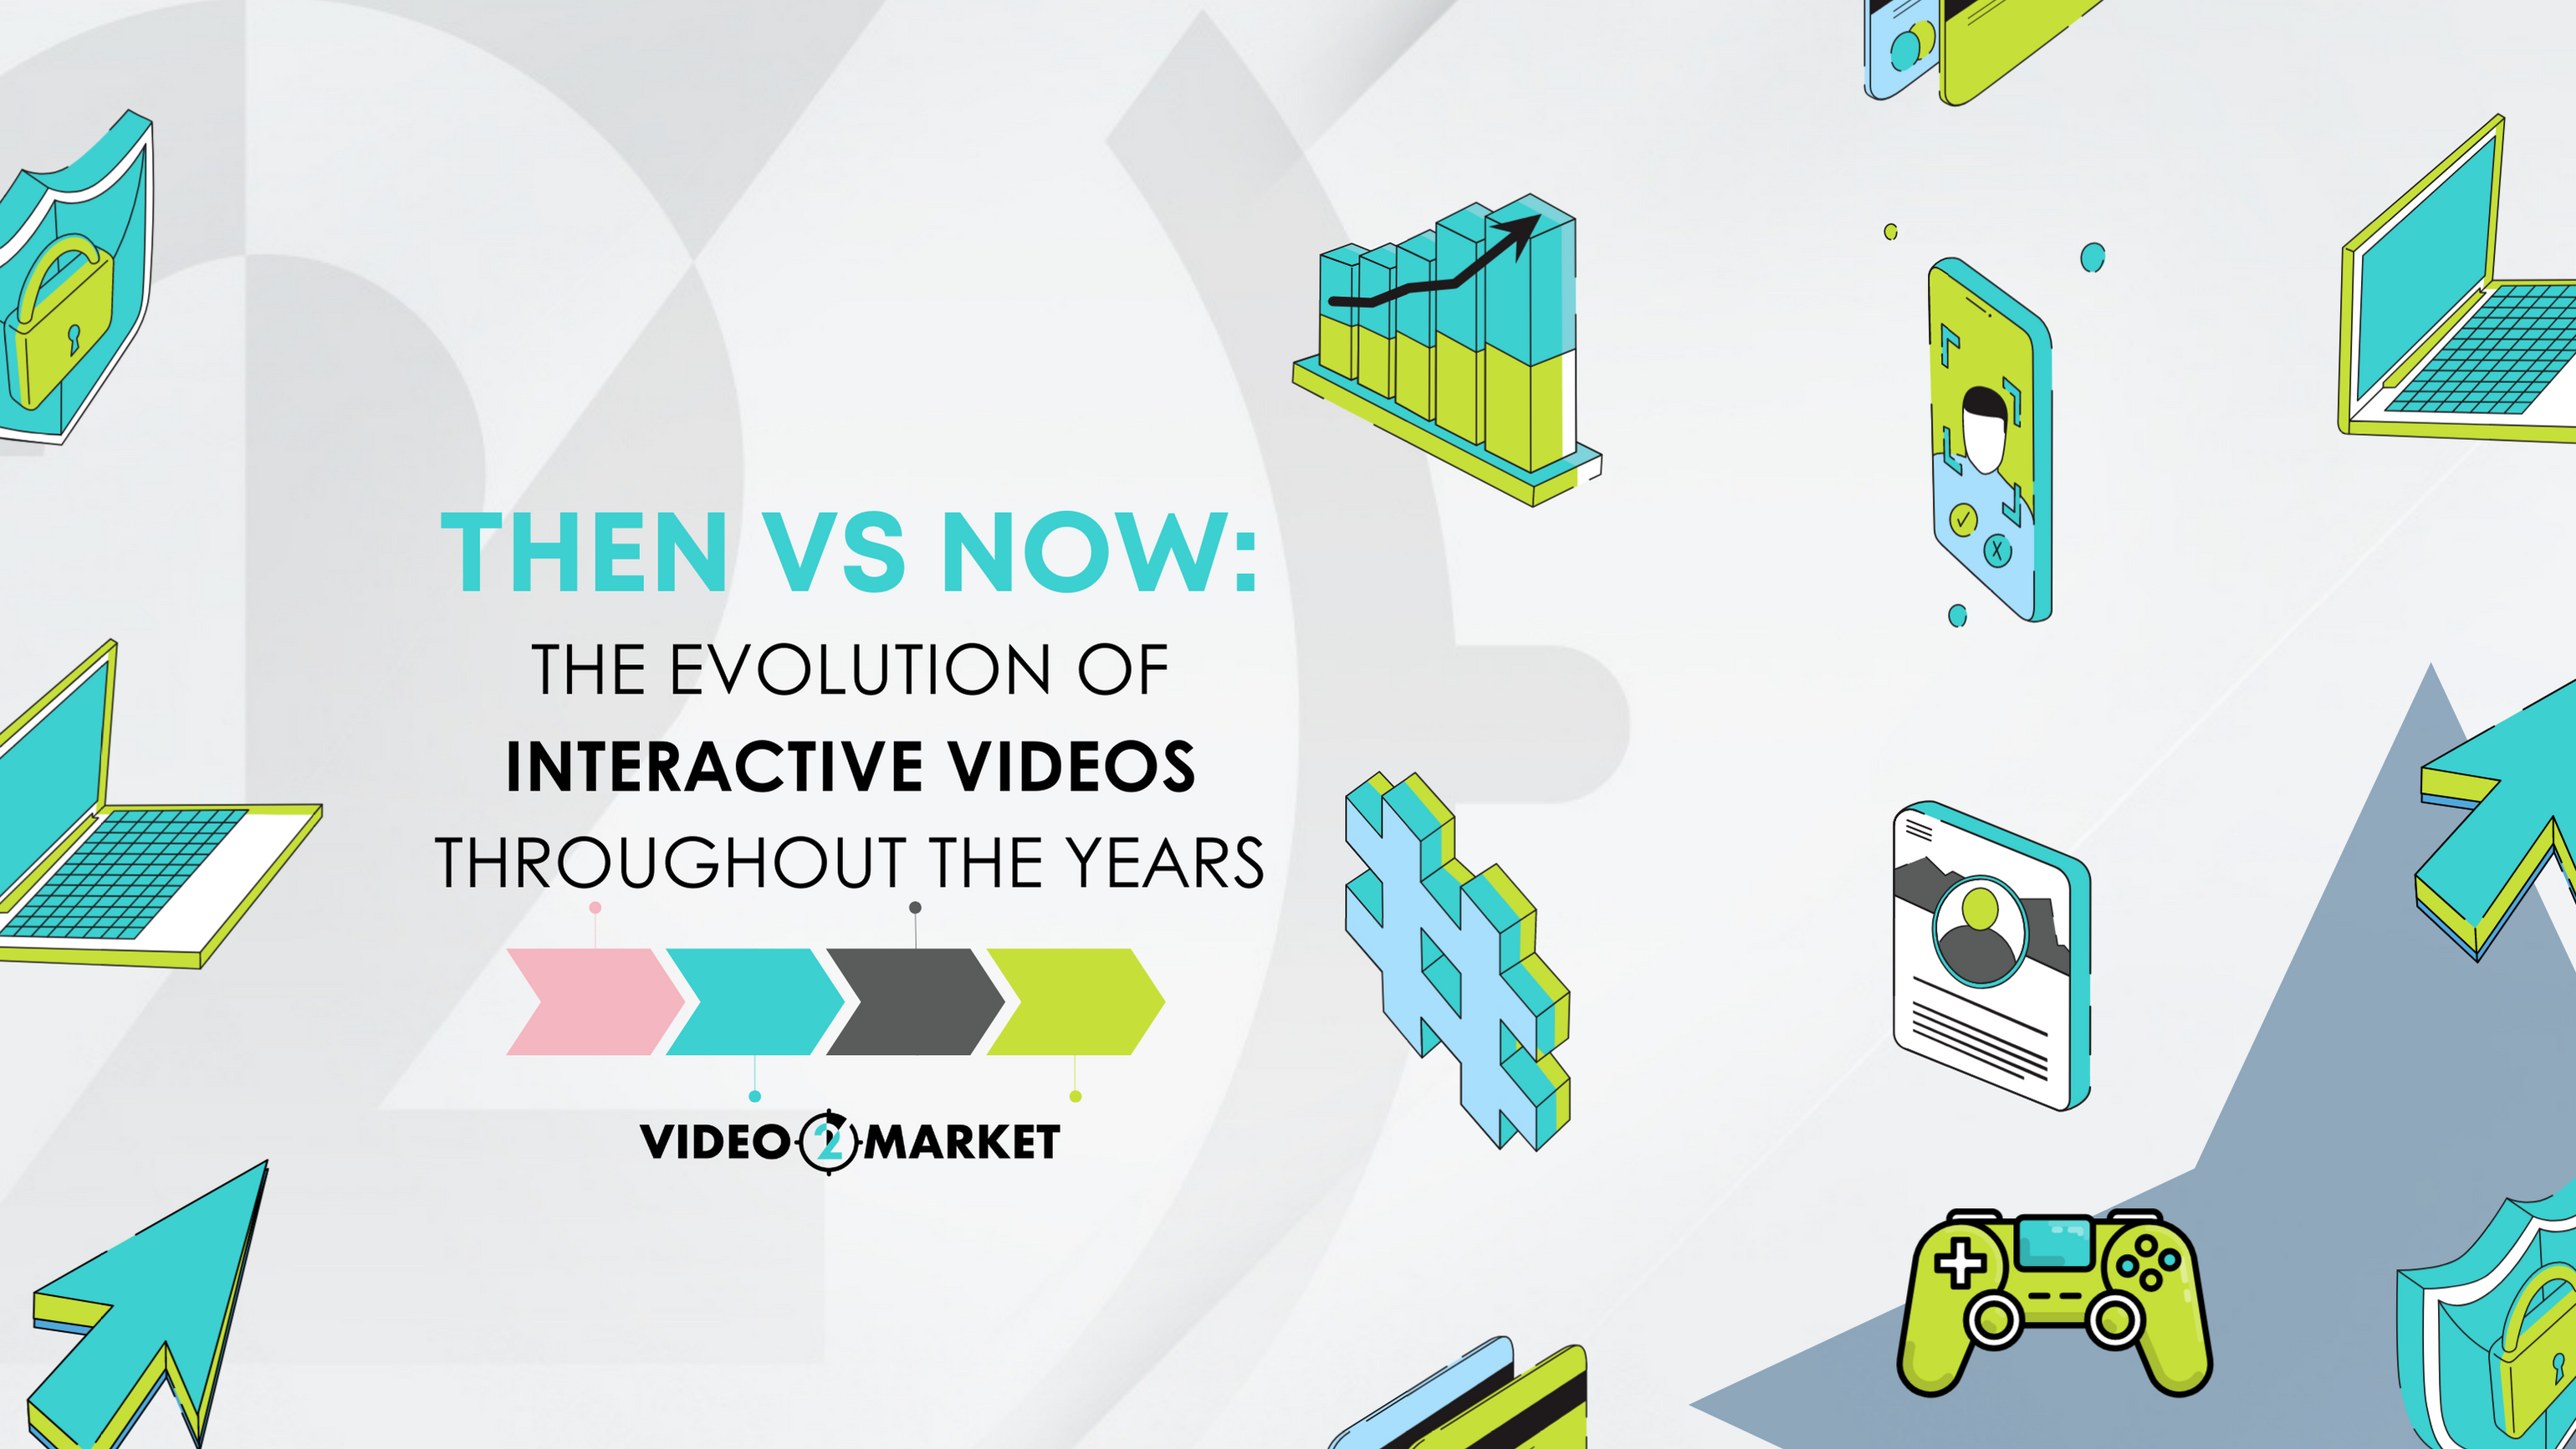 Then Vs Now: The Evolution of Interactive Videos throughout the Years